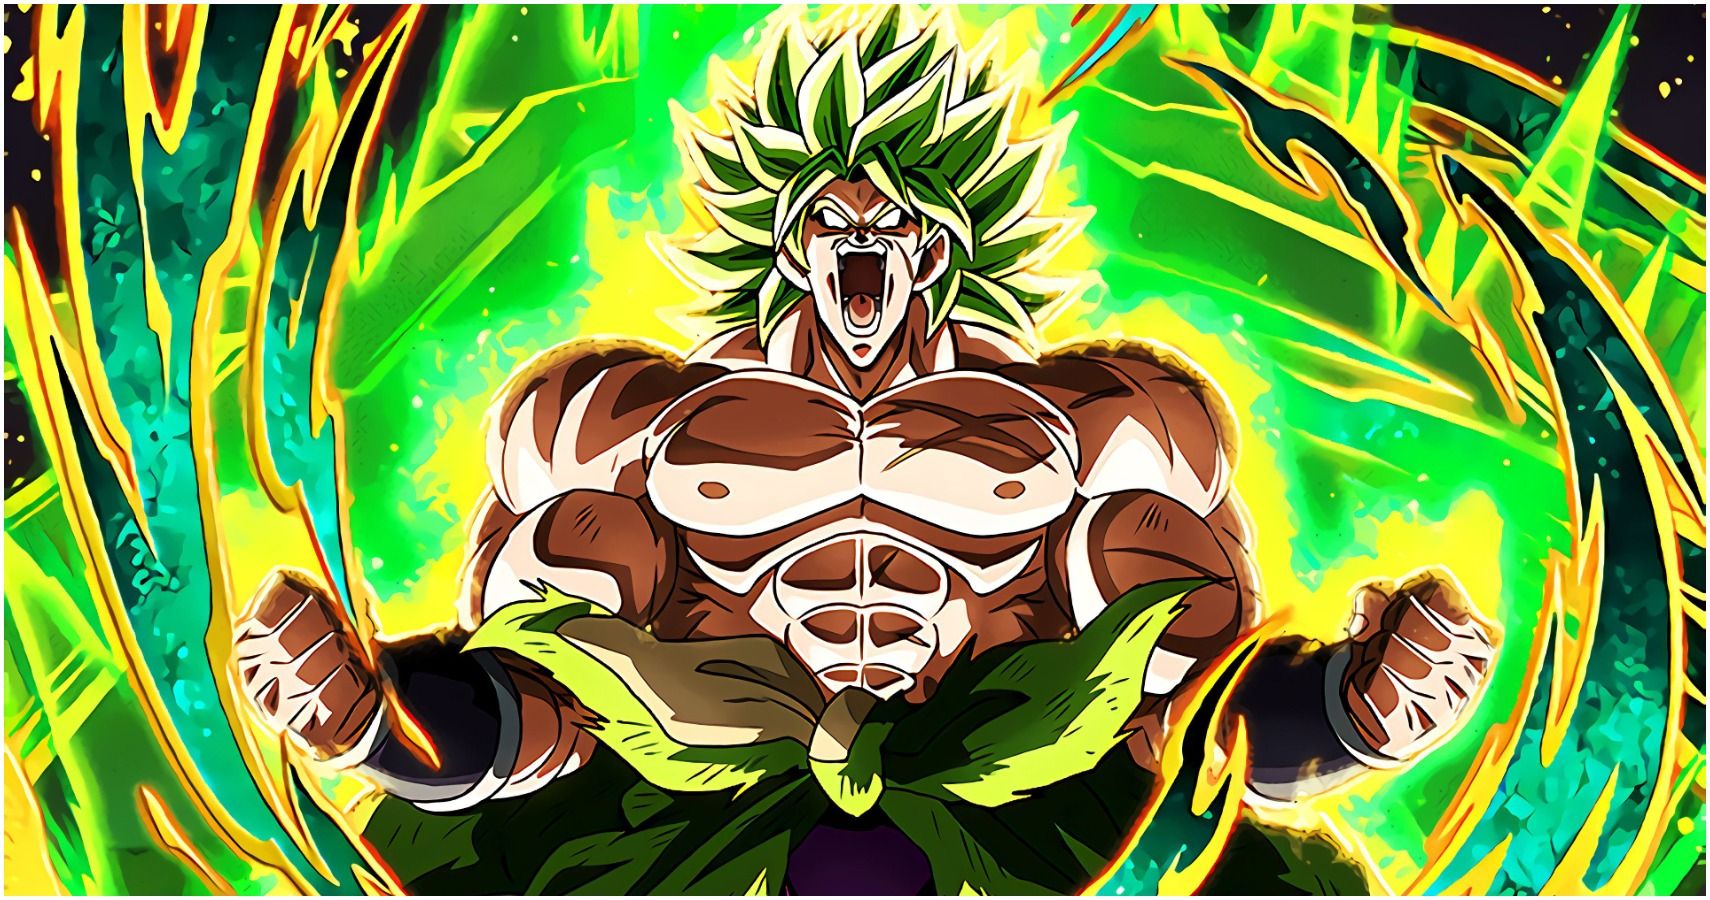 Broly charging up in his Ikari form from Dragon Ball Super Broly (the movie)